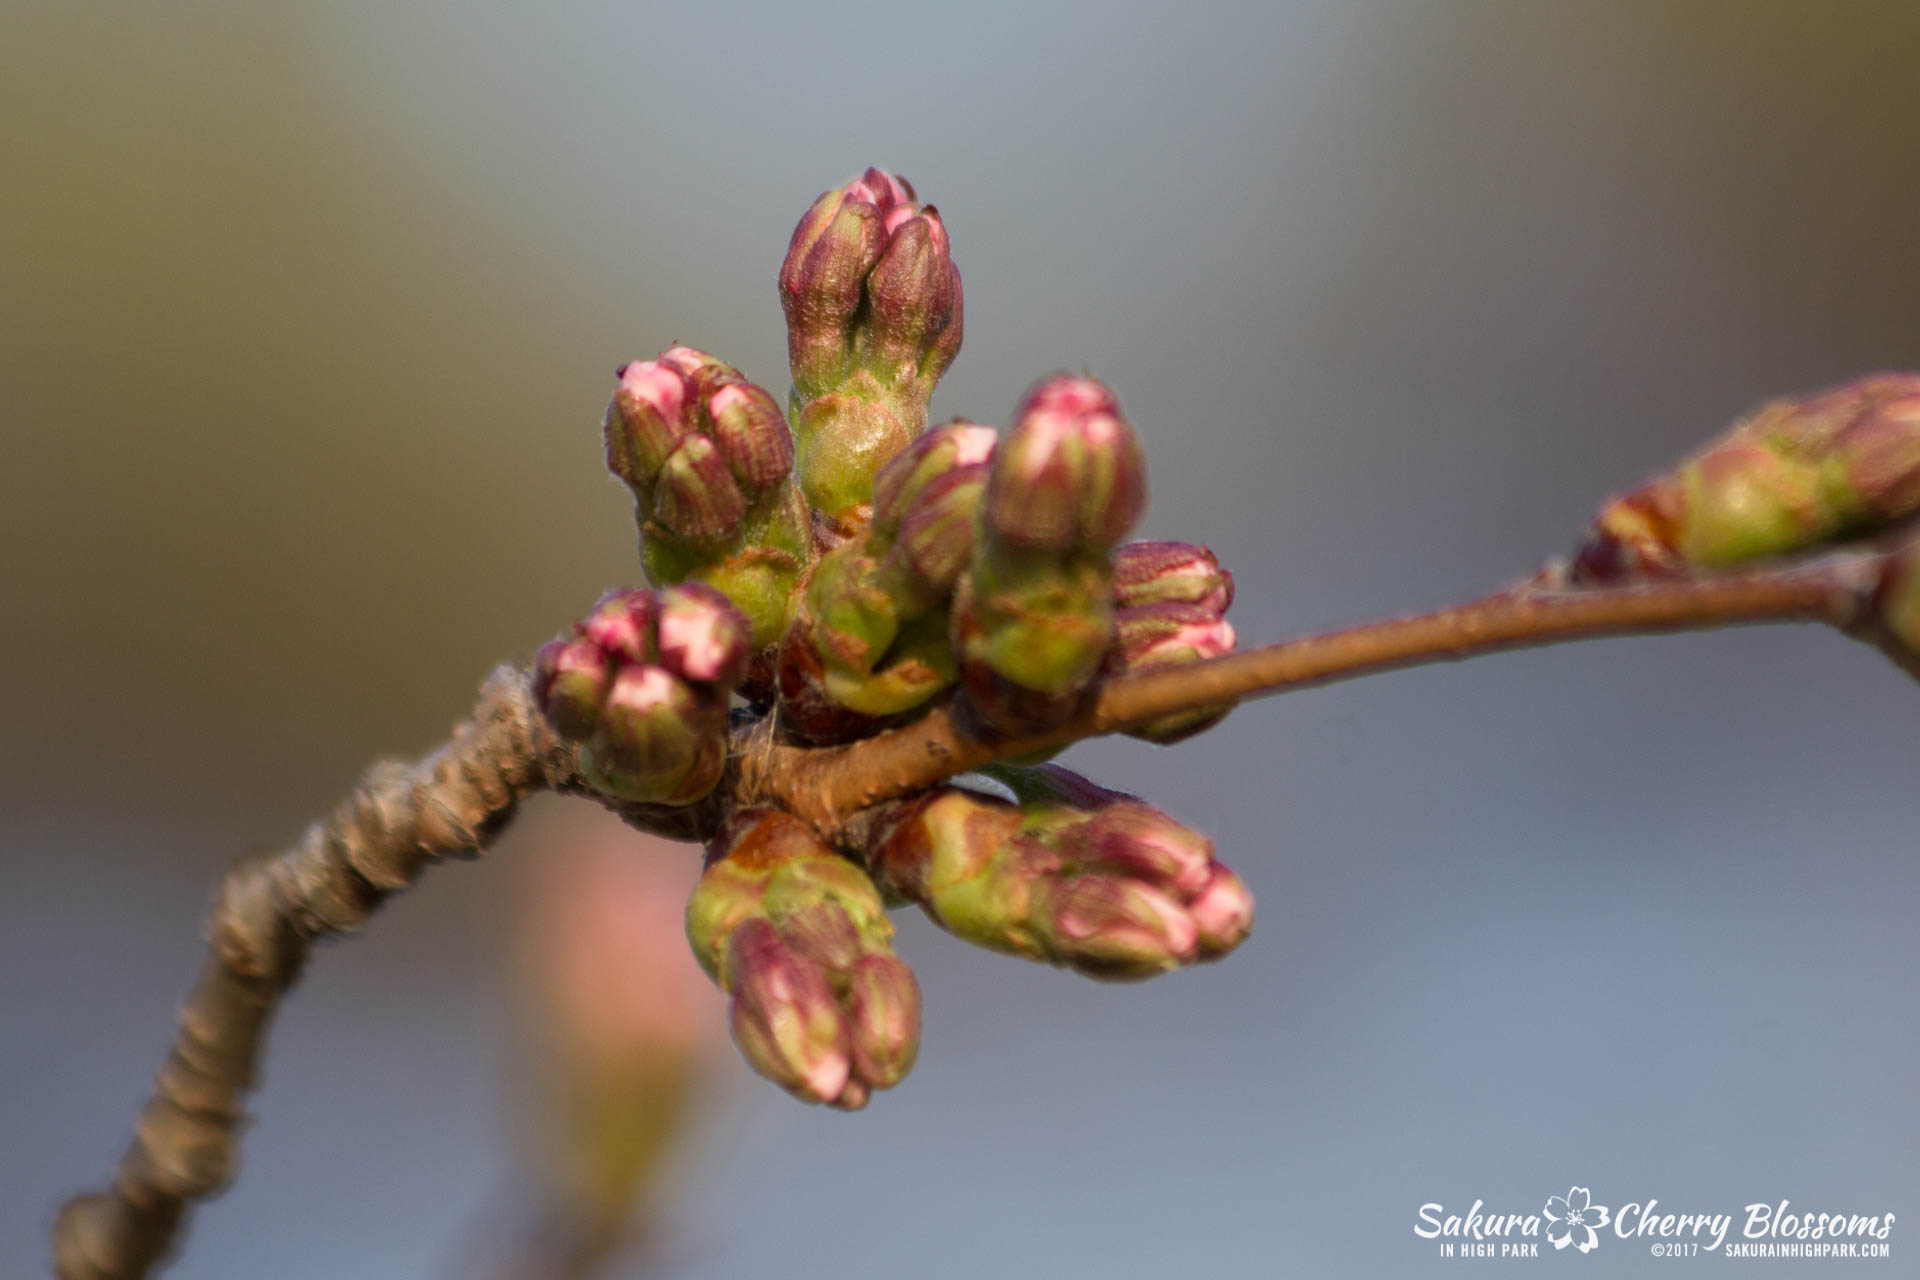 Sakura-in-High-Park-April-17-2017-florets-are-emerging-from-the-buds-throughout-the-park-37.jpg